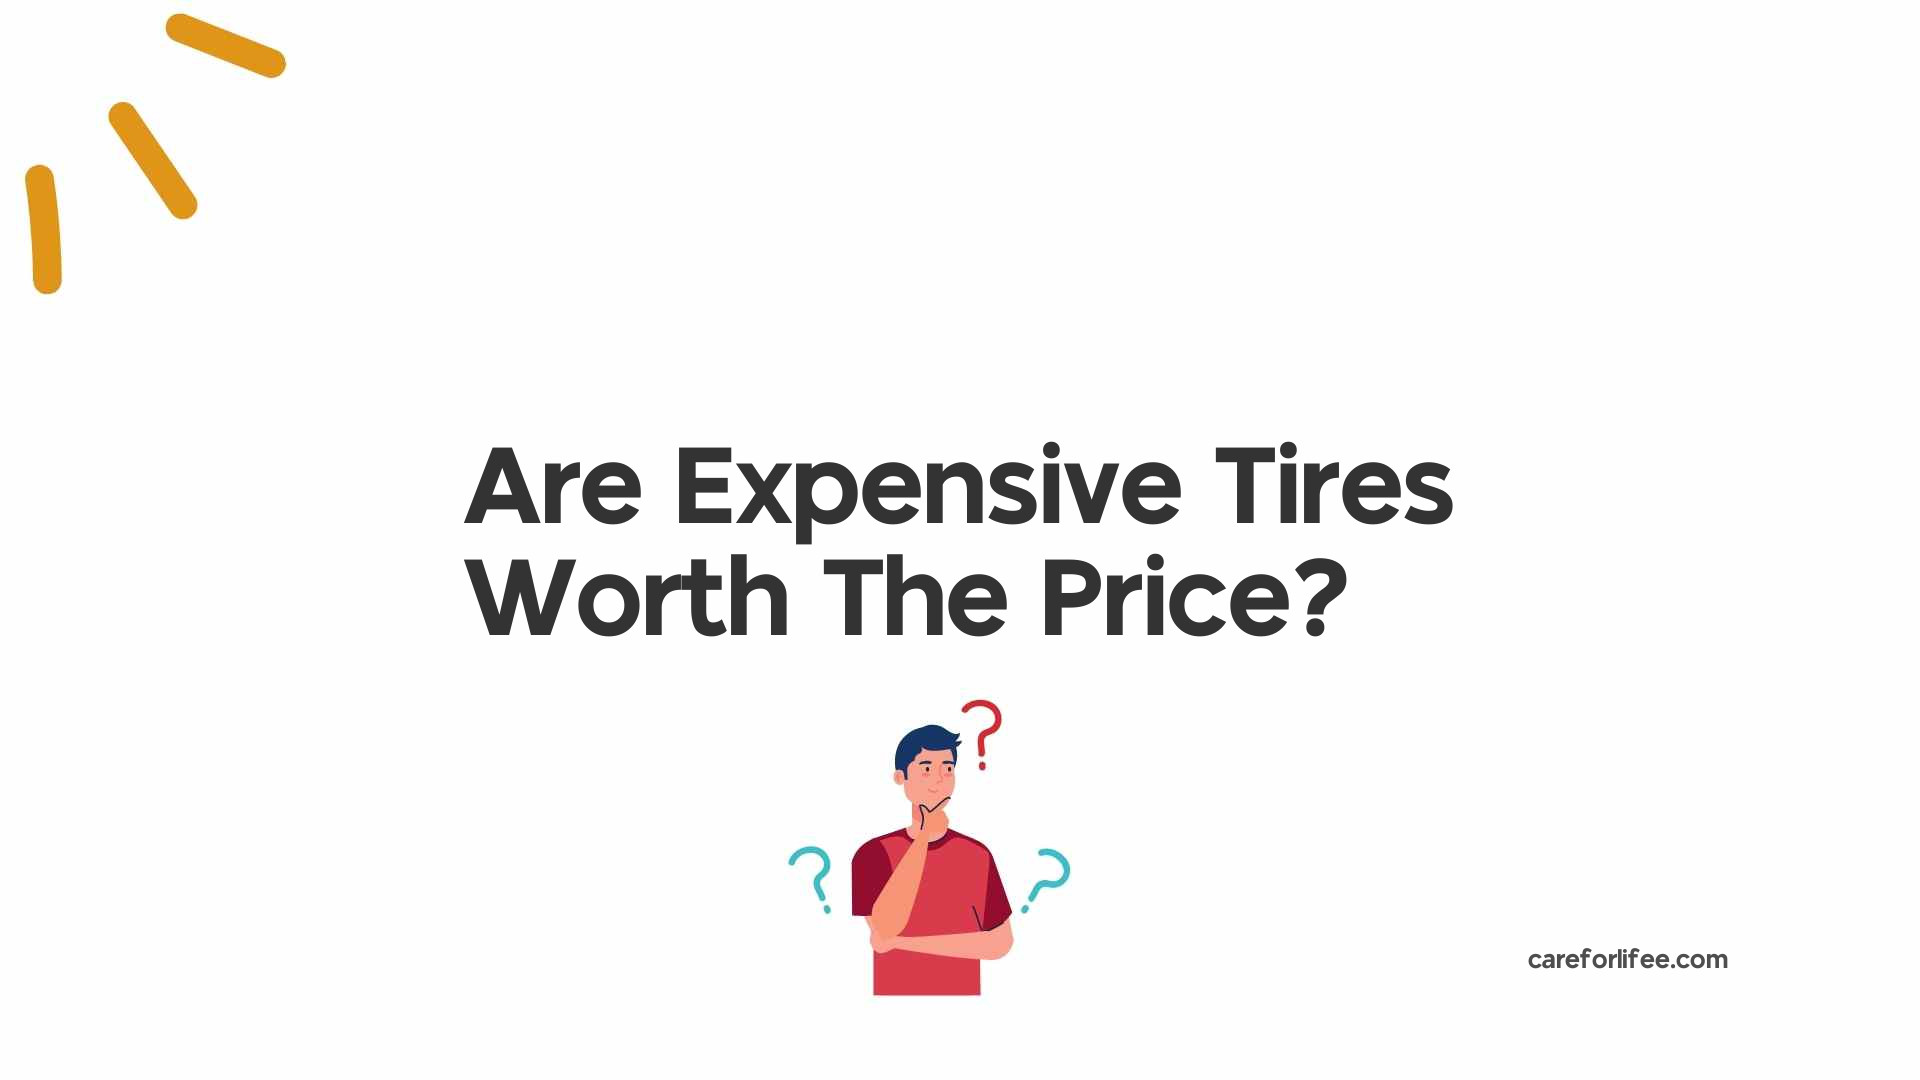 Are Expensive Tires Worth The Price?